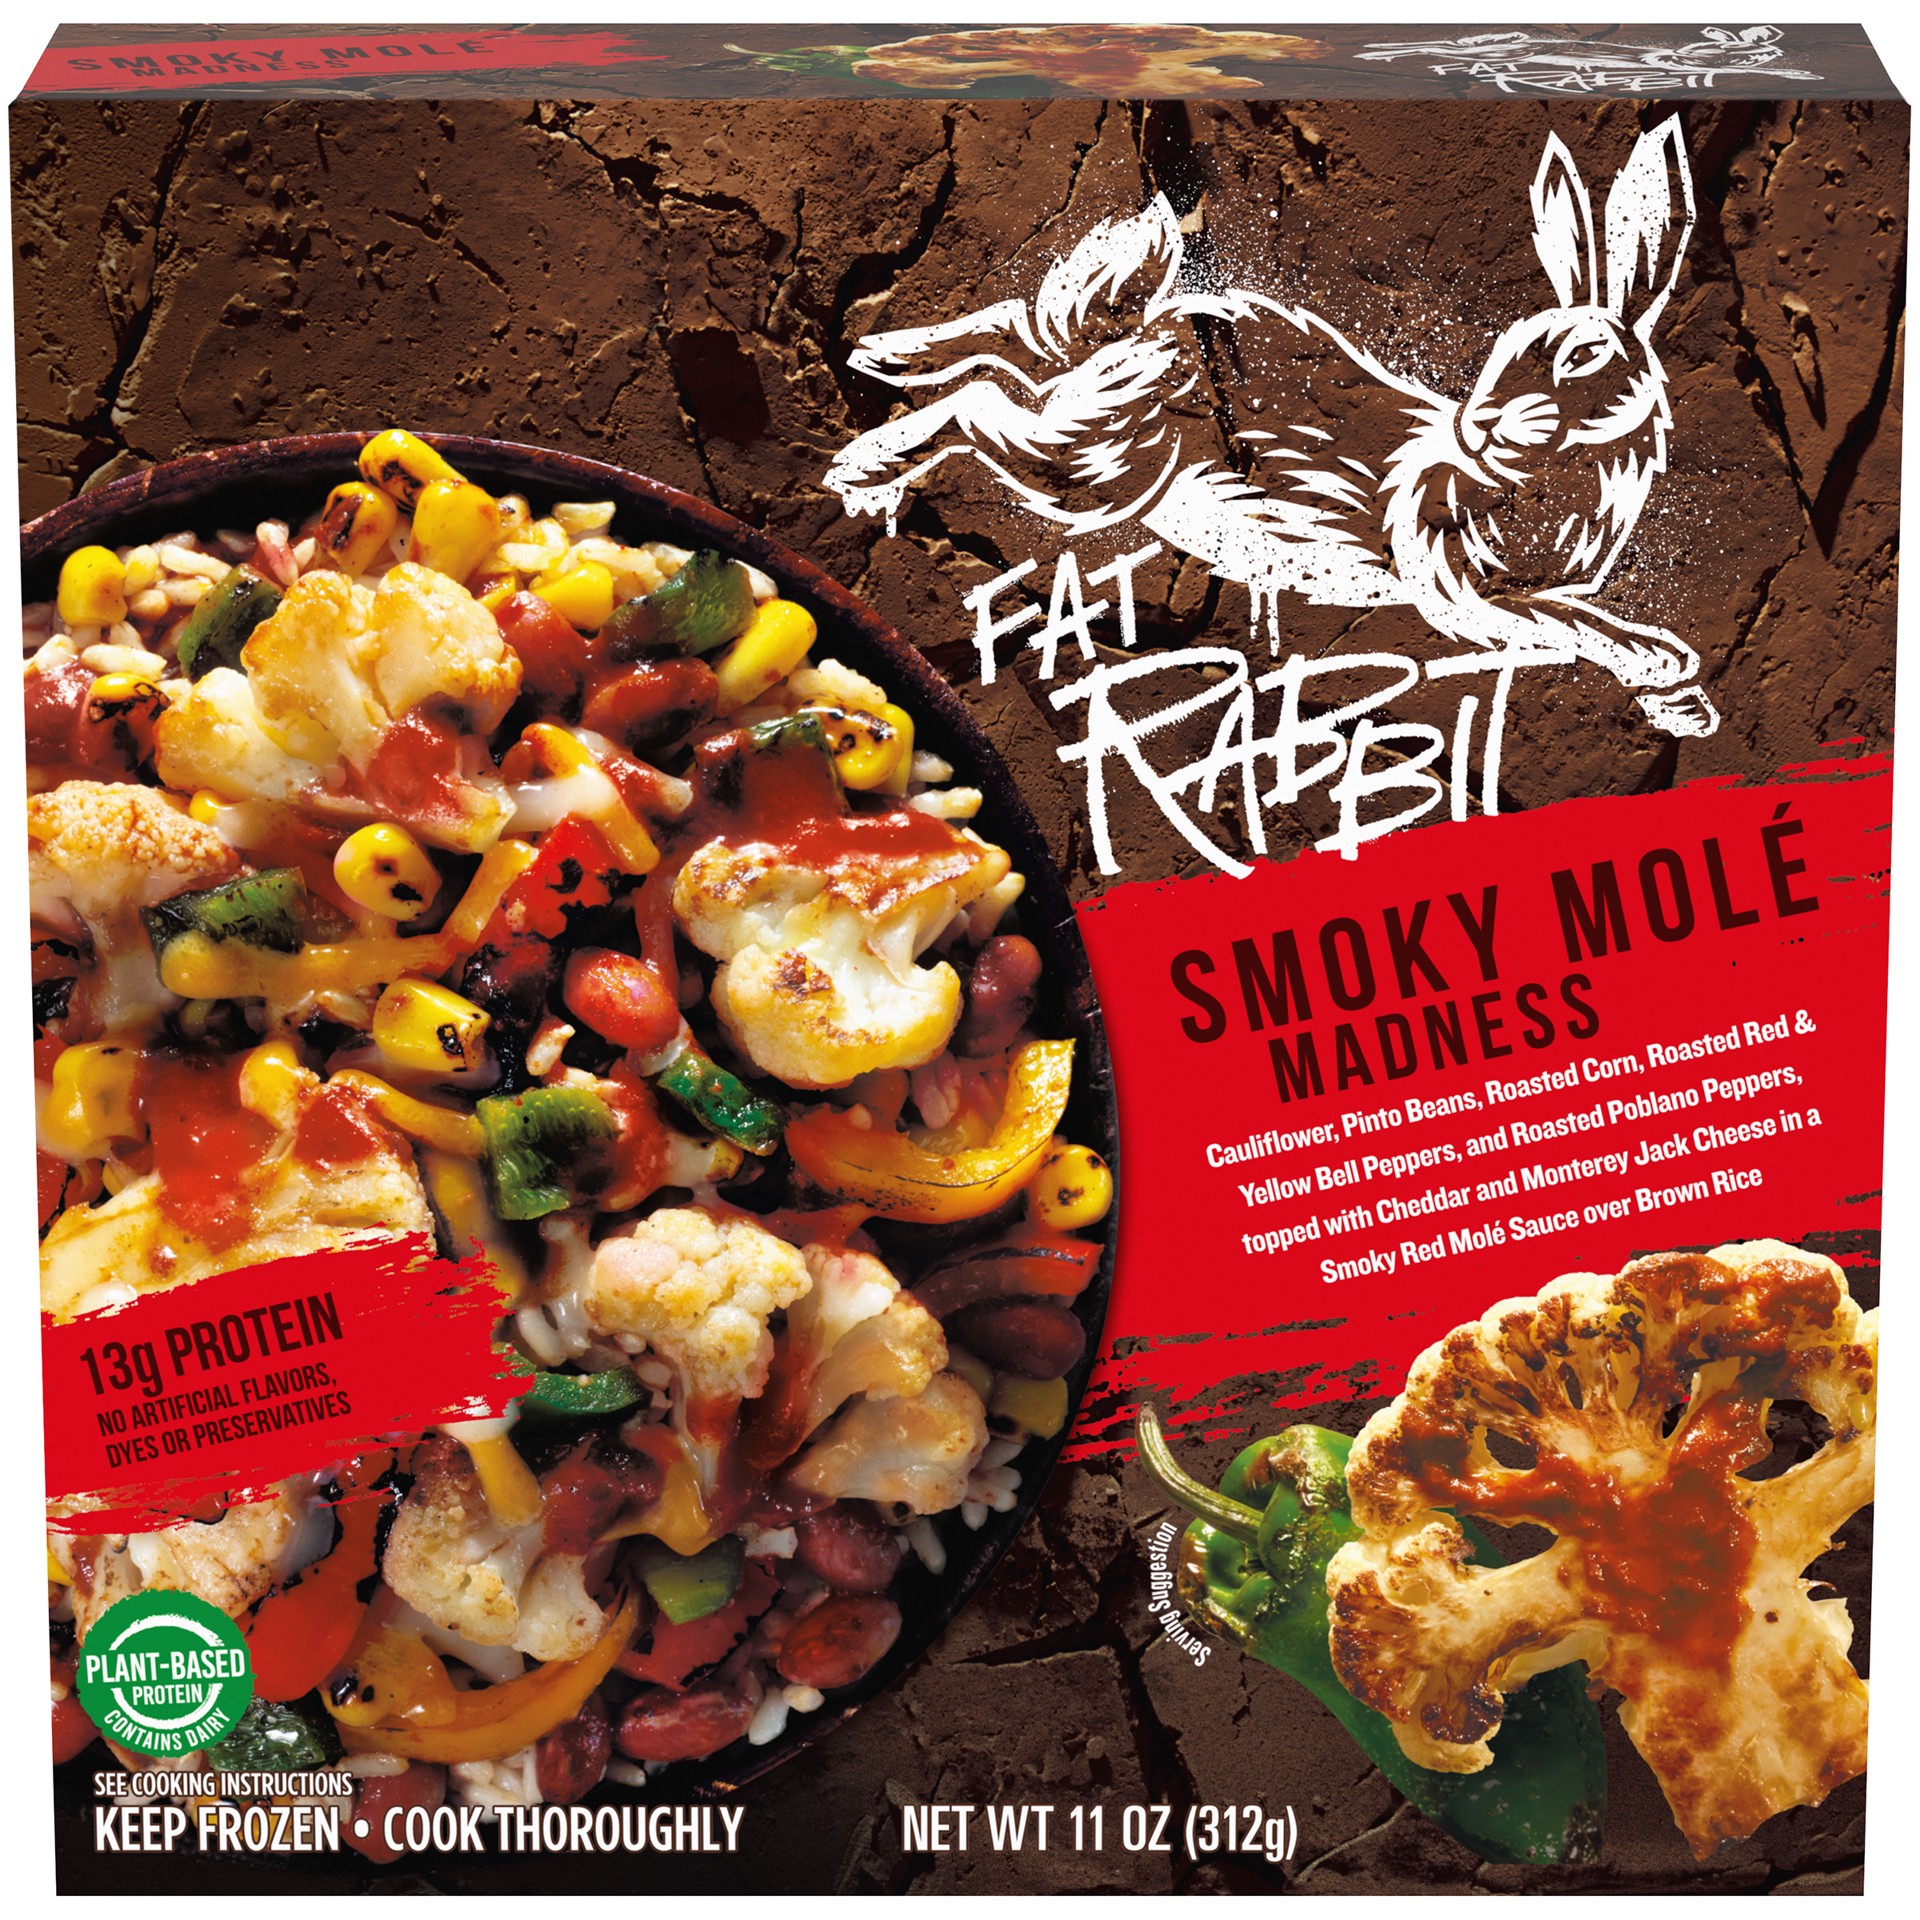 slide 1 of 14, Fat Rabbit Smoky Mole Madness with Roasted Vegetables, Pinto Beans & Cheese in a Red Mole Sauce over Brown Rice Frozen Meal, 11 oz Box, 11 oz